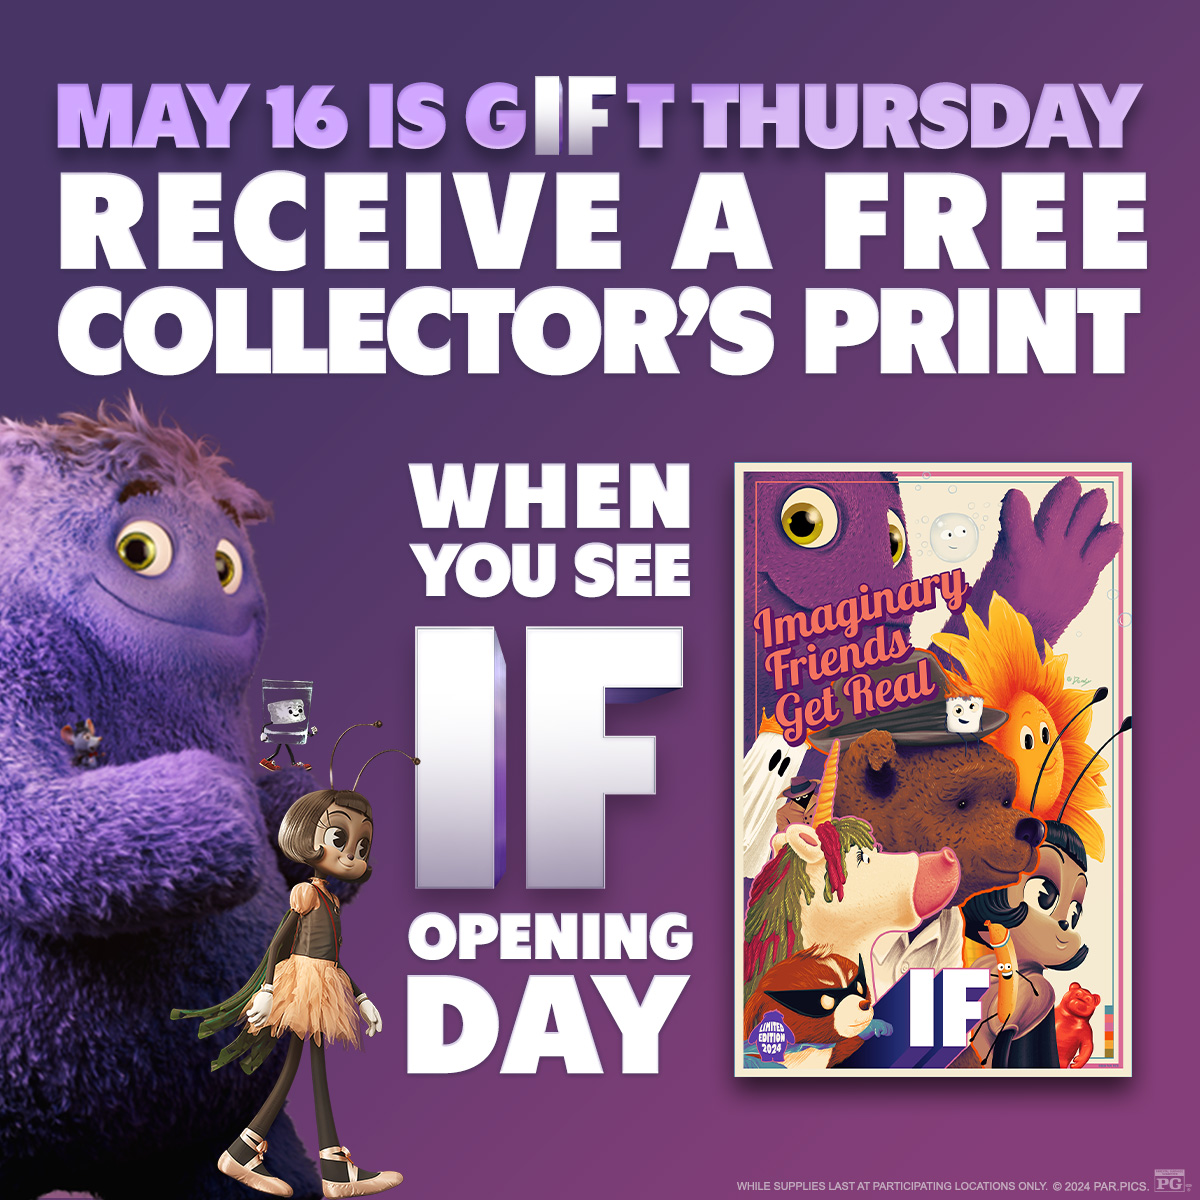 Watch #IFMovie on Thursday, 5/16 and receive a free collector's print! 🎟️: cinemark.com/movies/if?utm_…